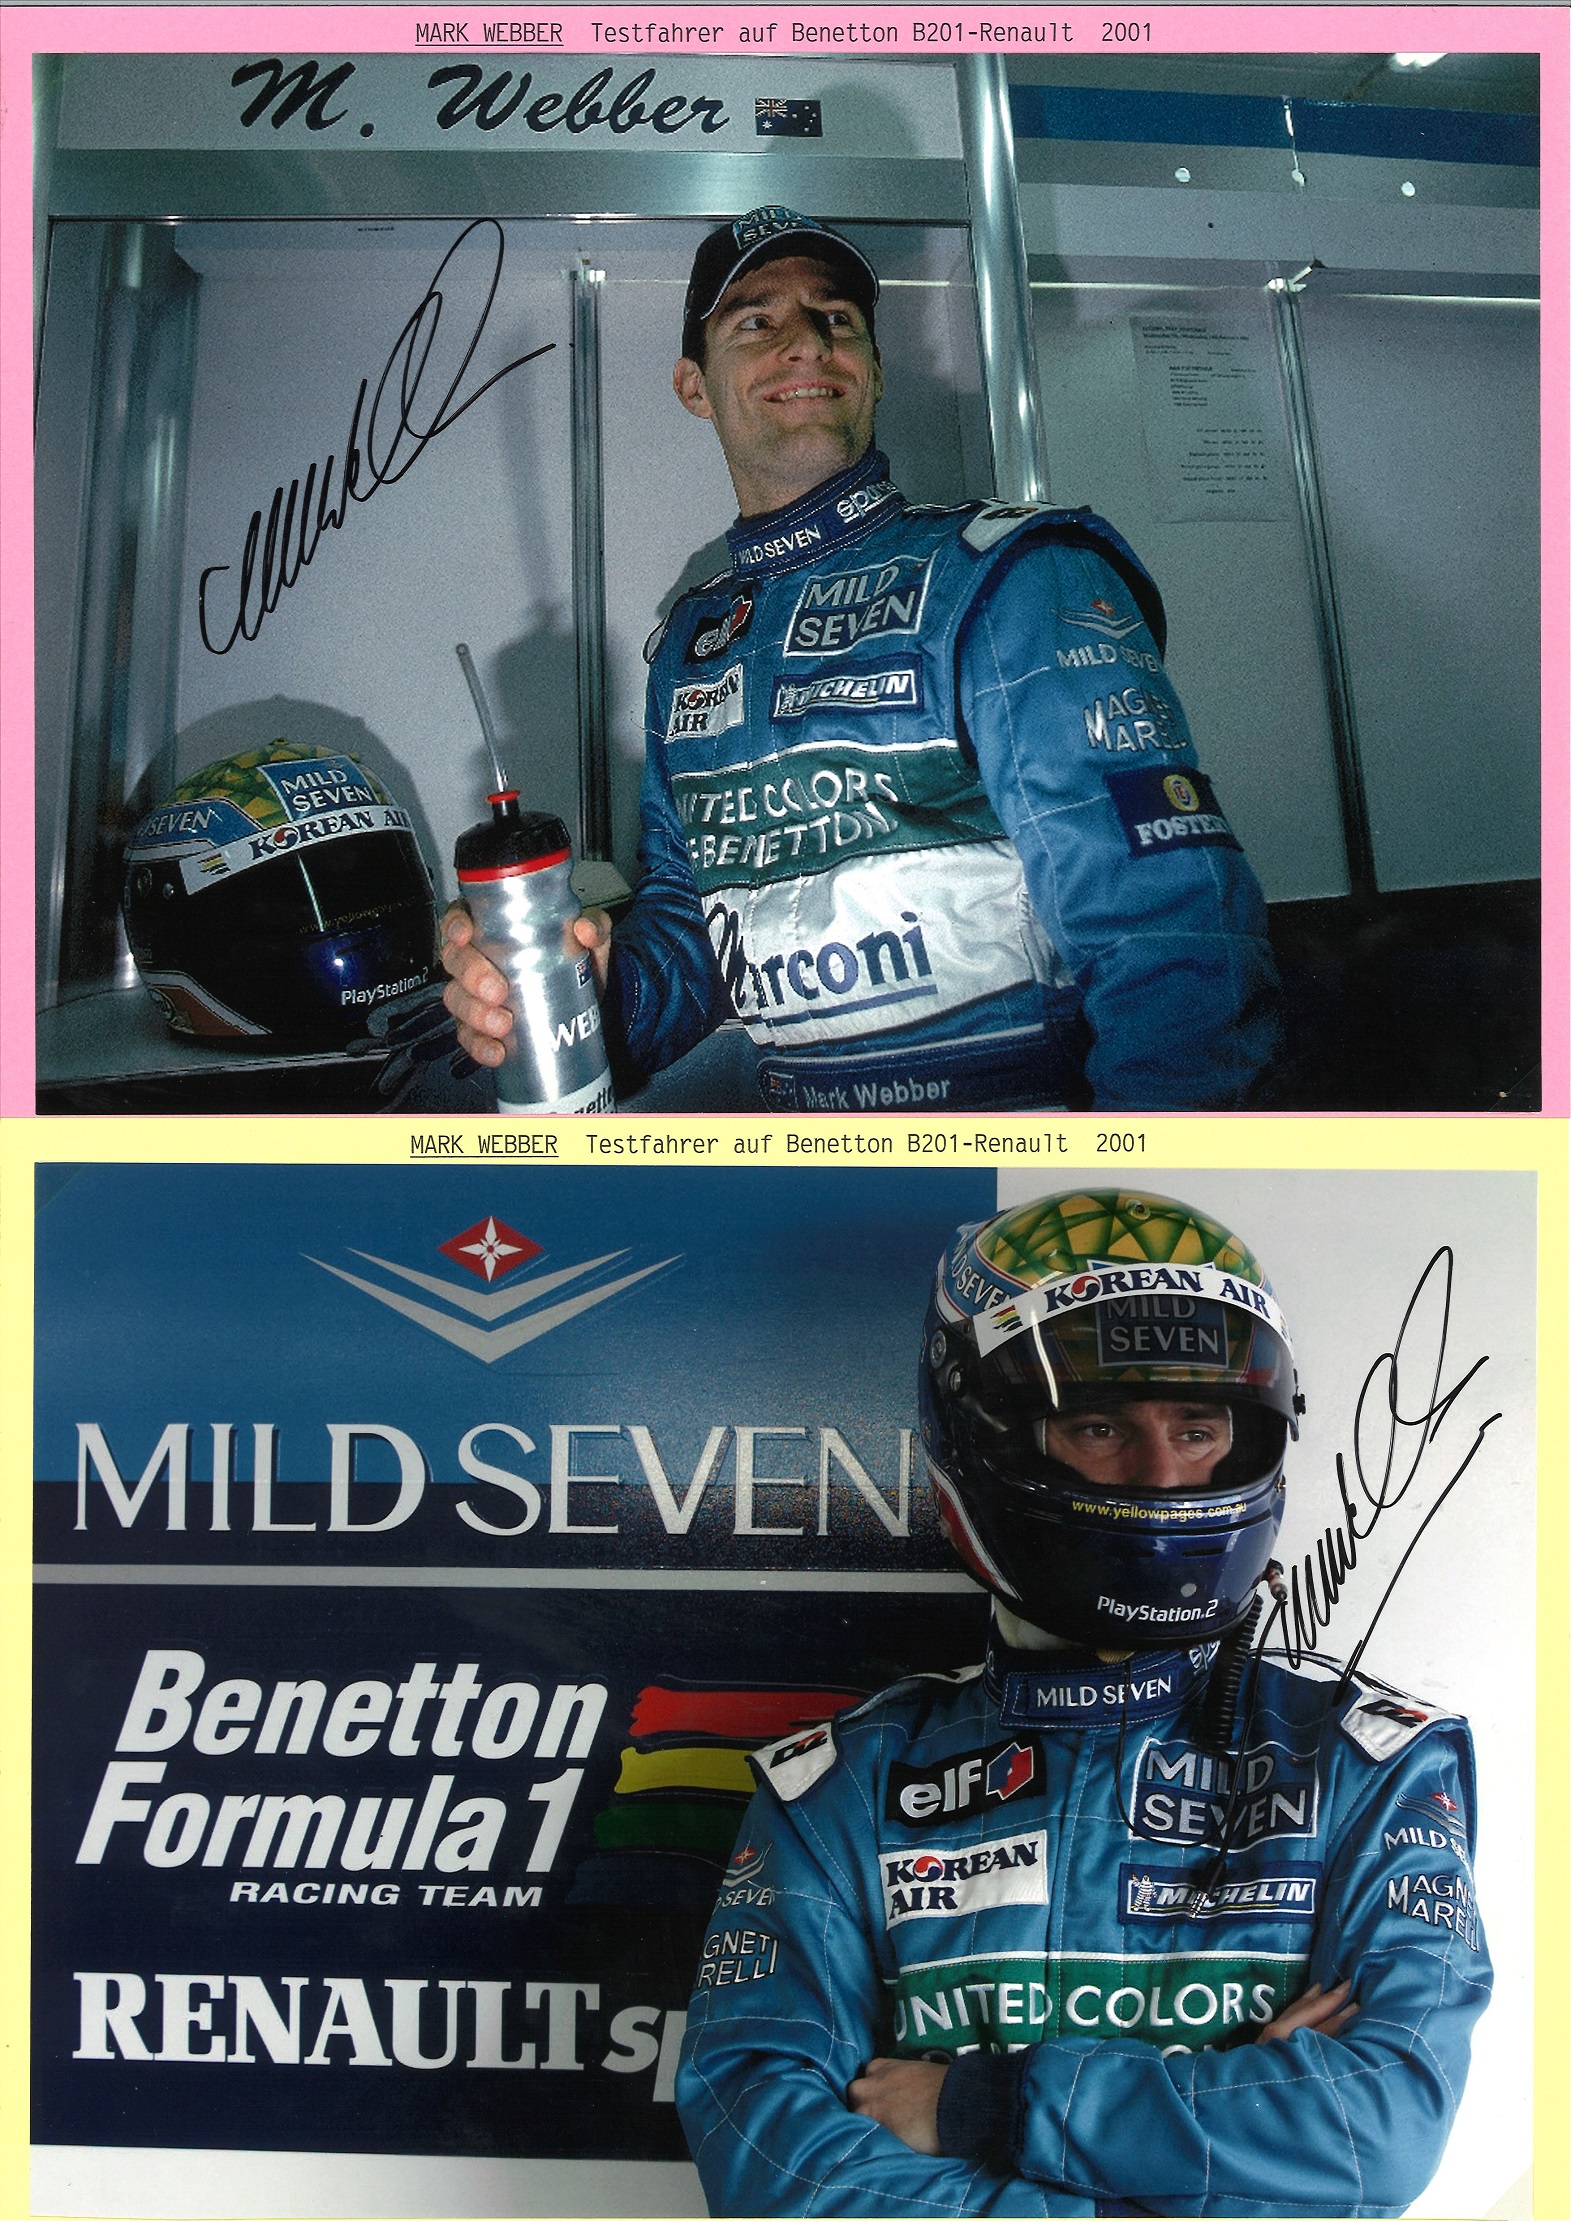 Mark Webber Motor Racing signed photo collection - Image 3 of 5